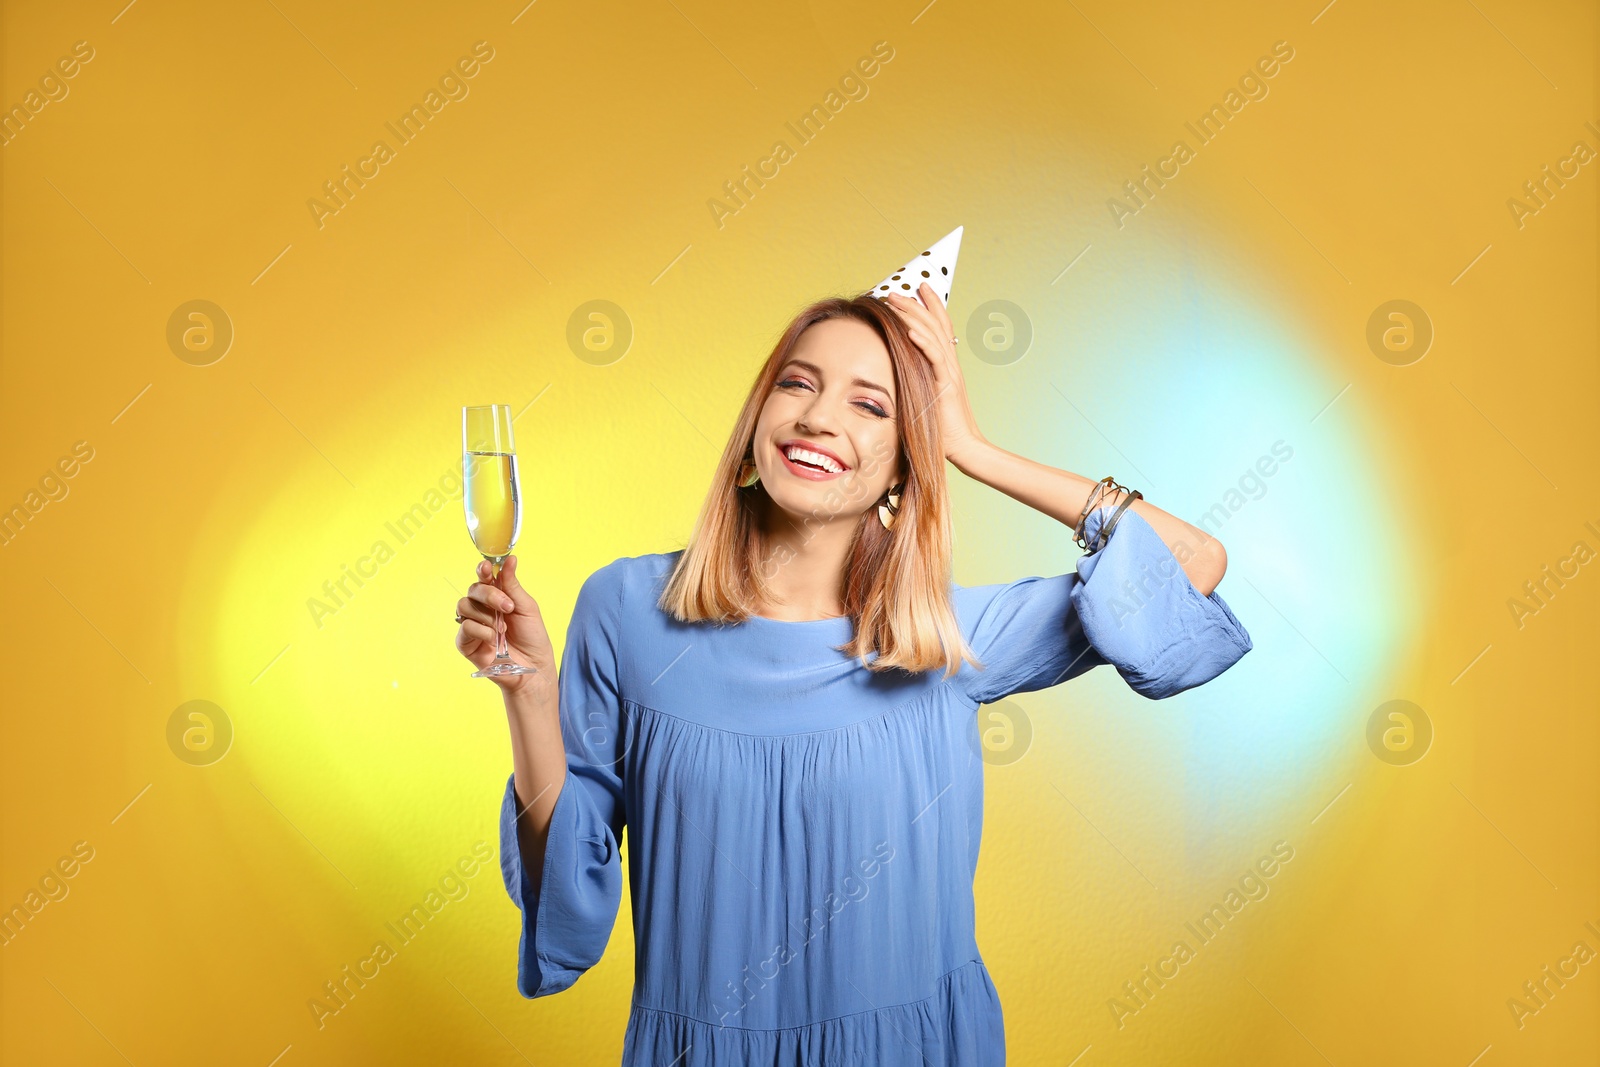 Photo of Portrait of happy woman with party hat and champagne in glass on color background